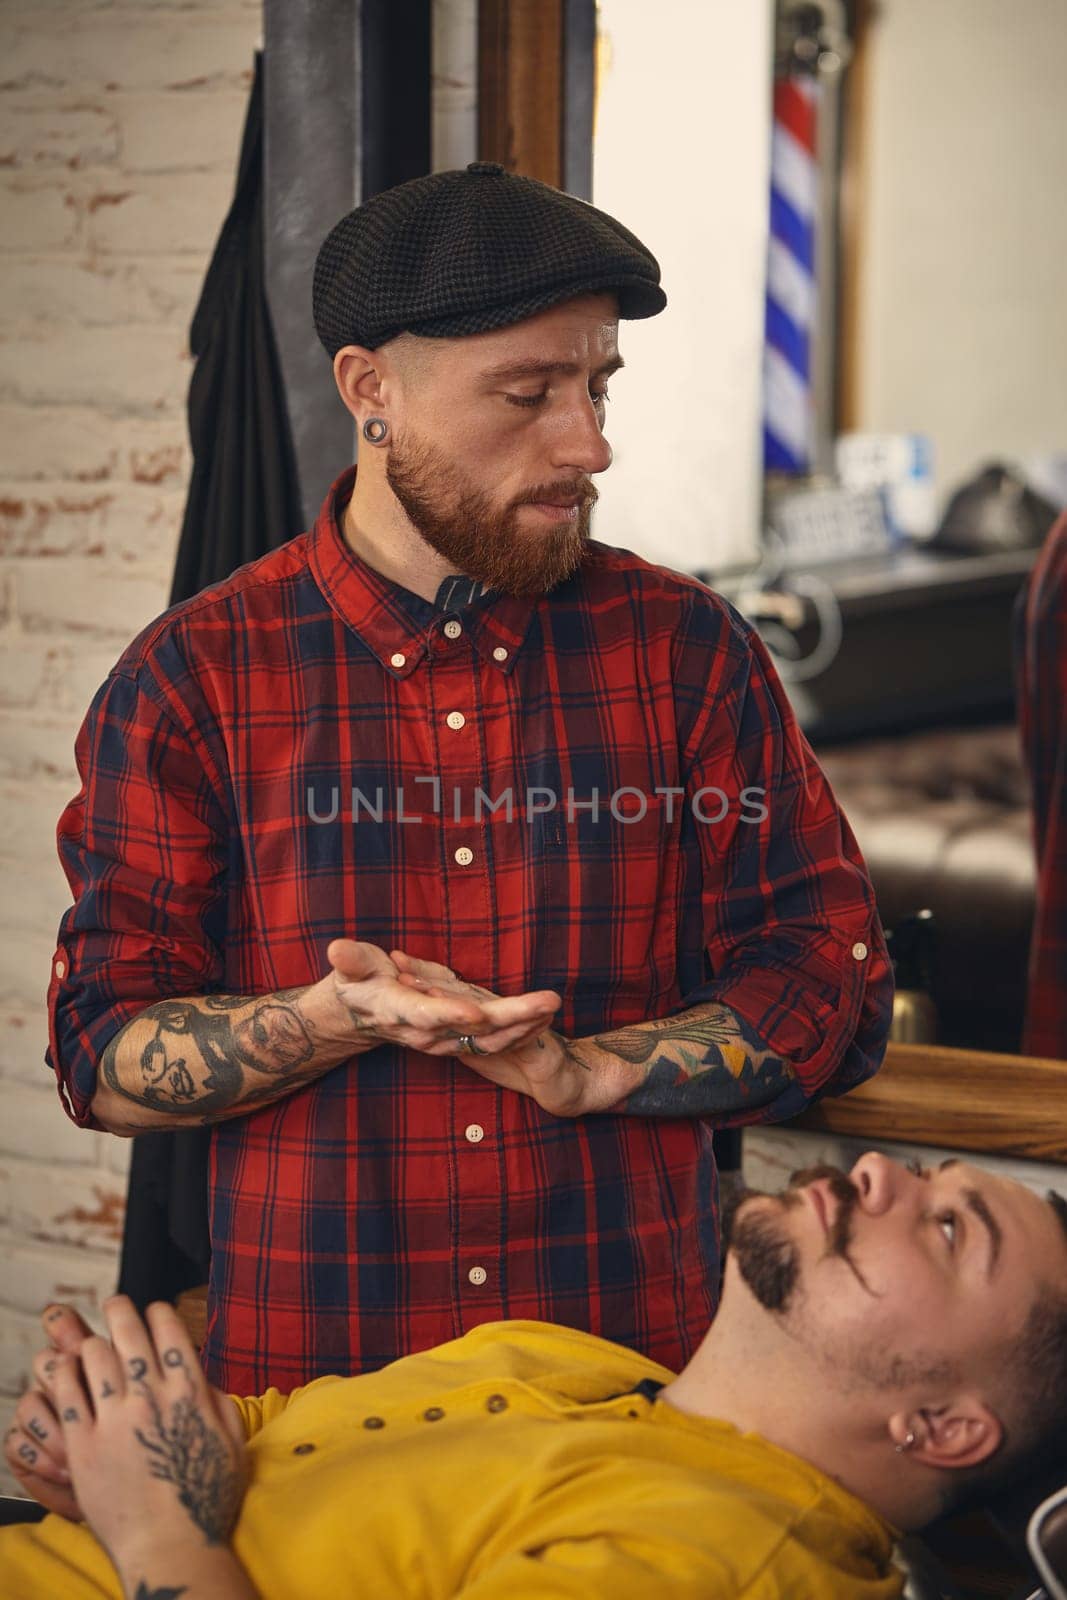 Client during beard shaving in barber shop by nazarovsergey